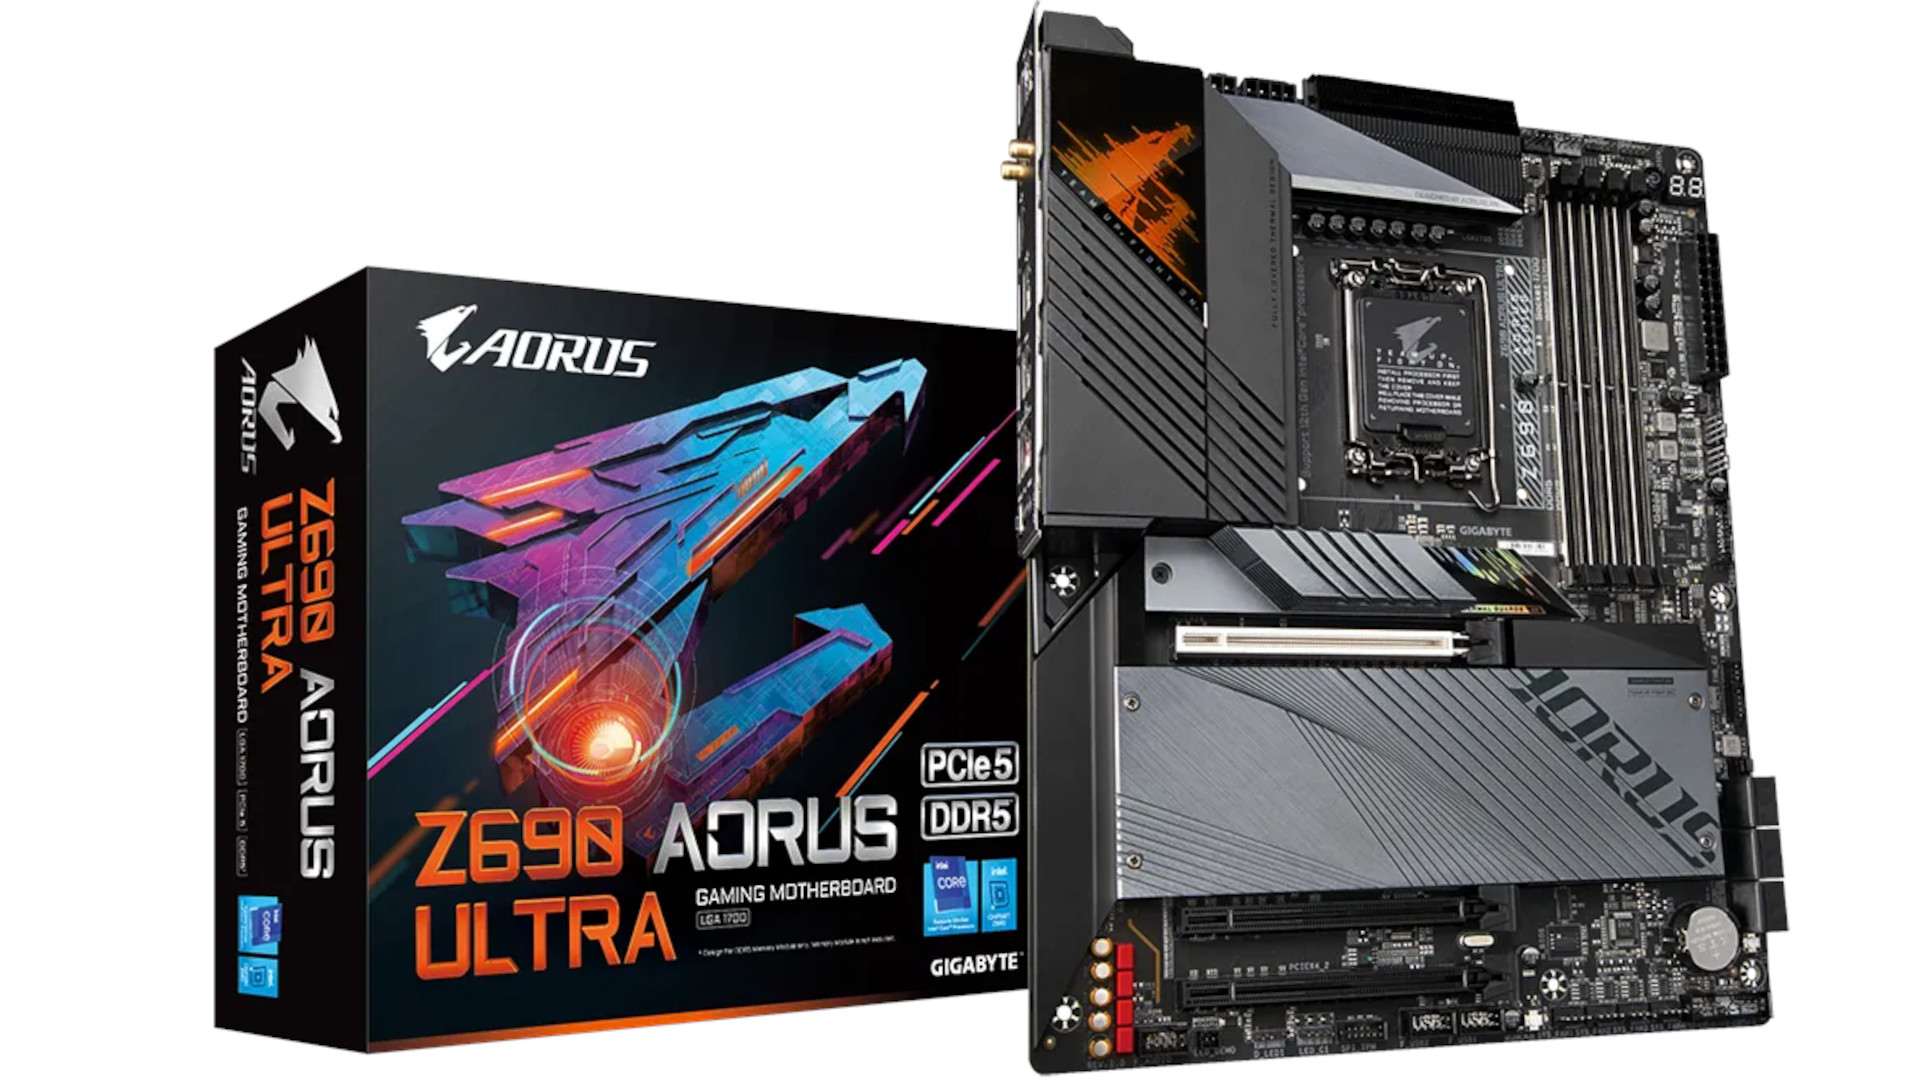 You are currently viewing GIGABYTE Z690 AORUS ULTRA Motherboard Review